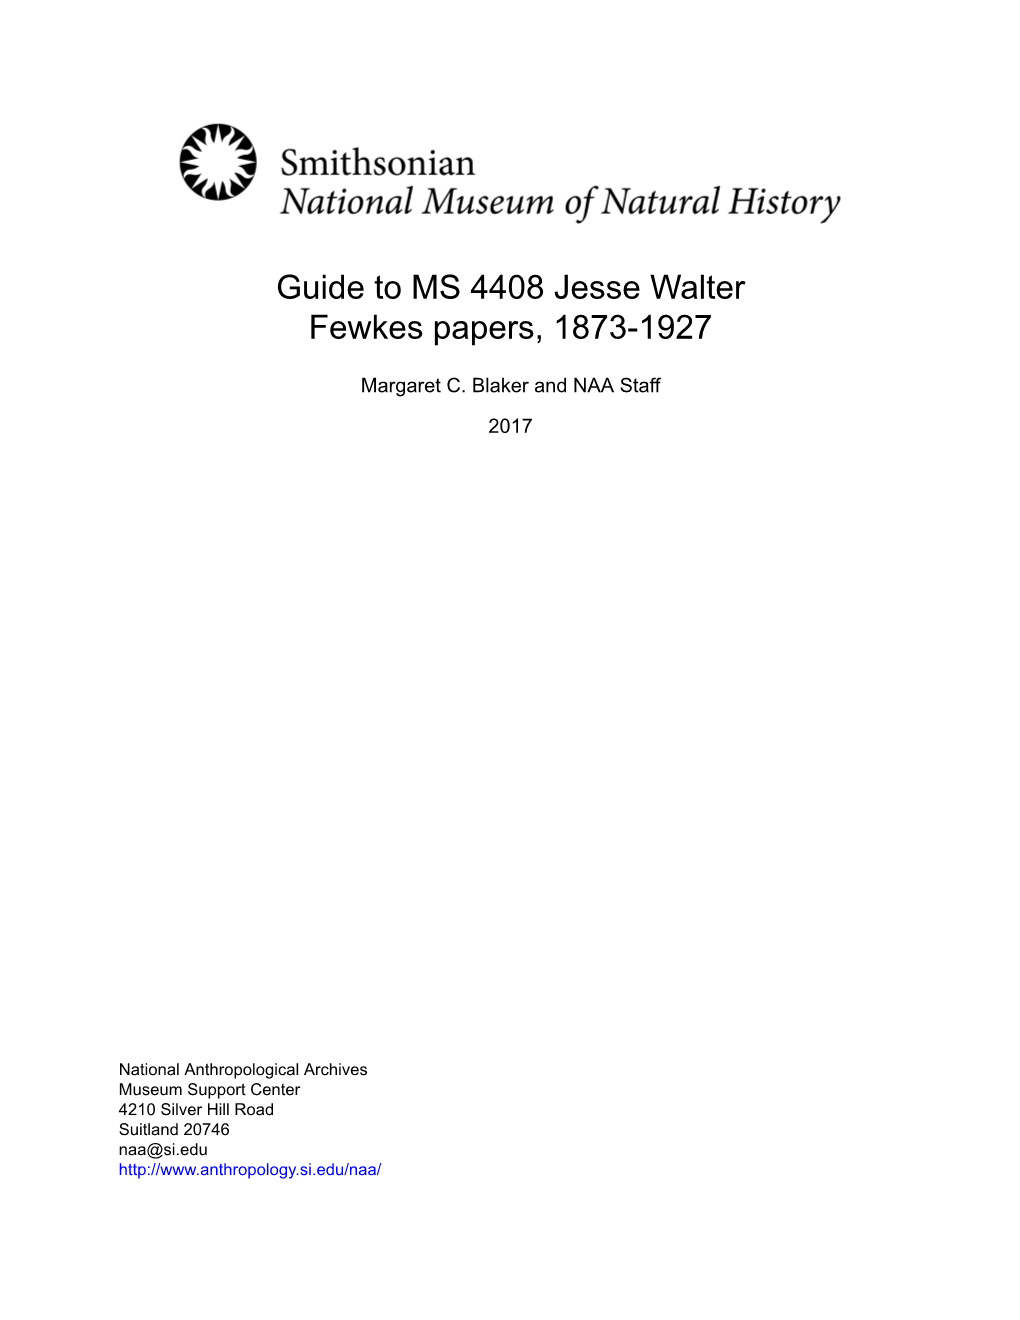 Guide to MS 4408 Jesse Walter Fewkes Papers, 1873-1927